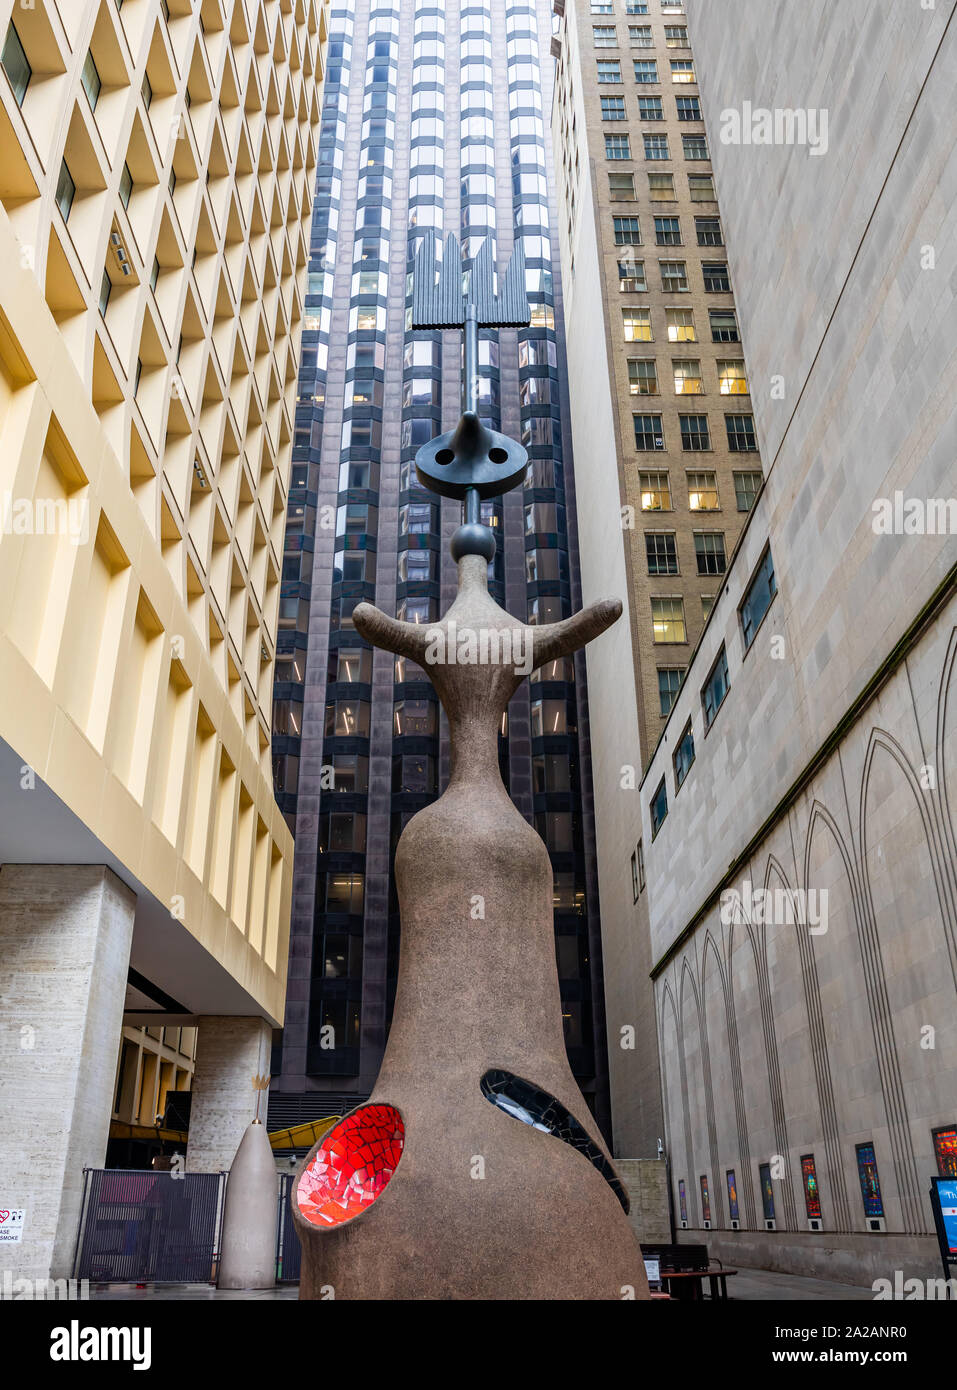 Chicago, Illinois, USA. May 9, 2019. Miro Chicago, the sun the moon and one star, sculpture in public view at Washington street. Stock Photo